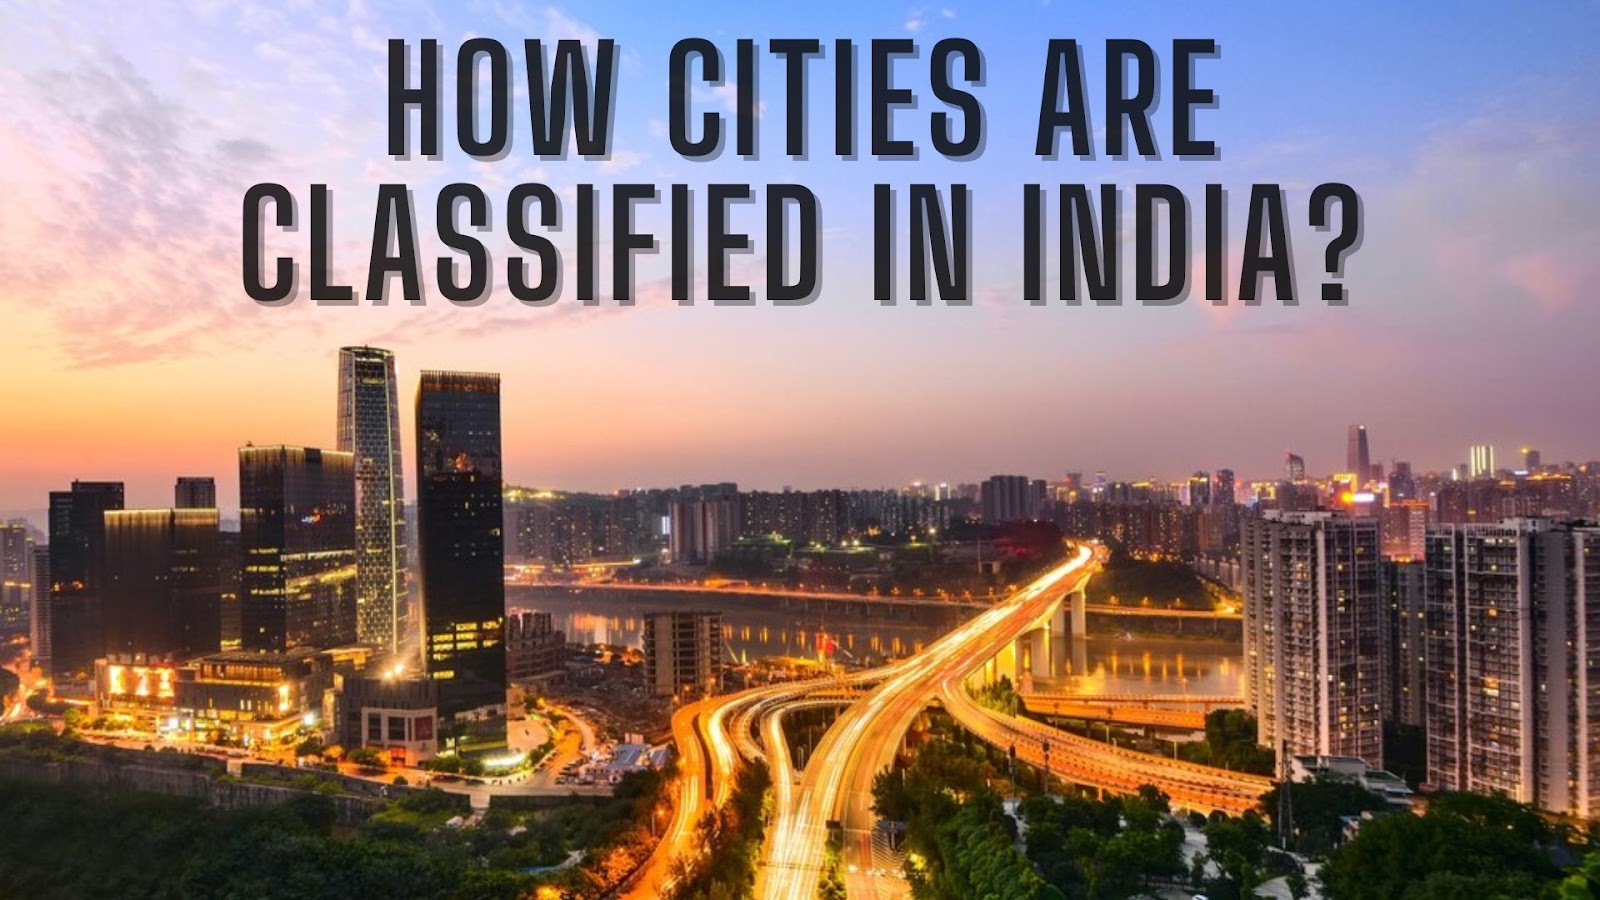 How are cities classified in India?